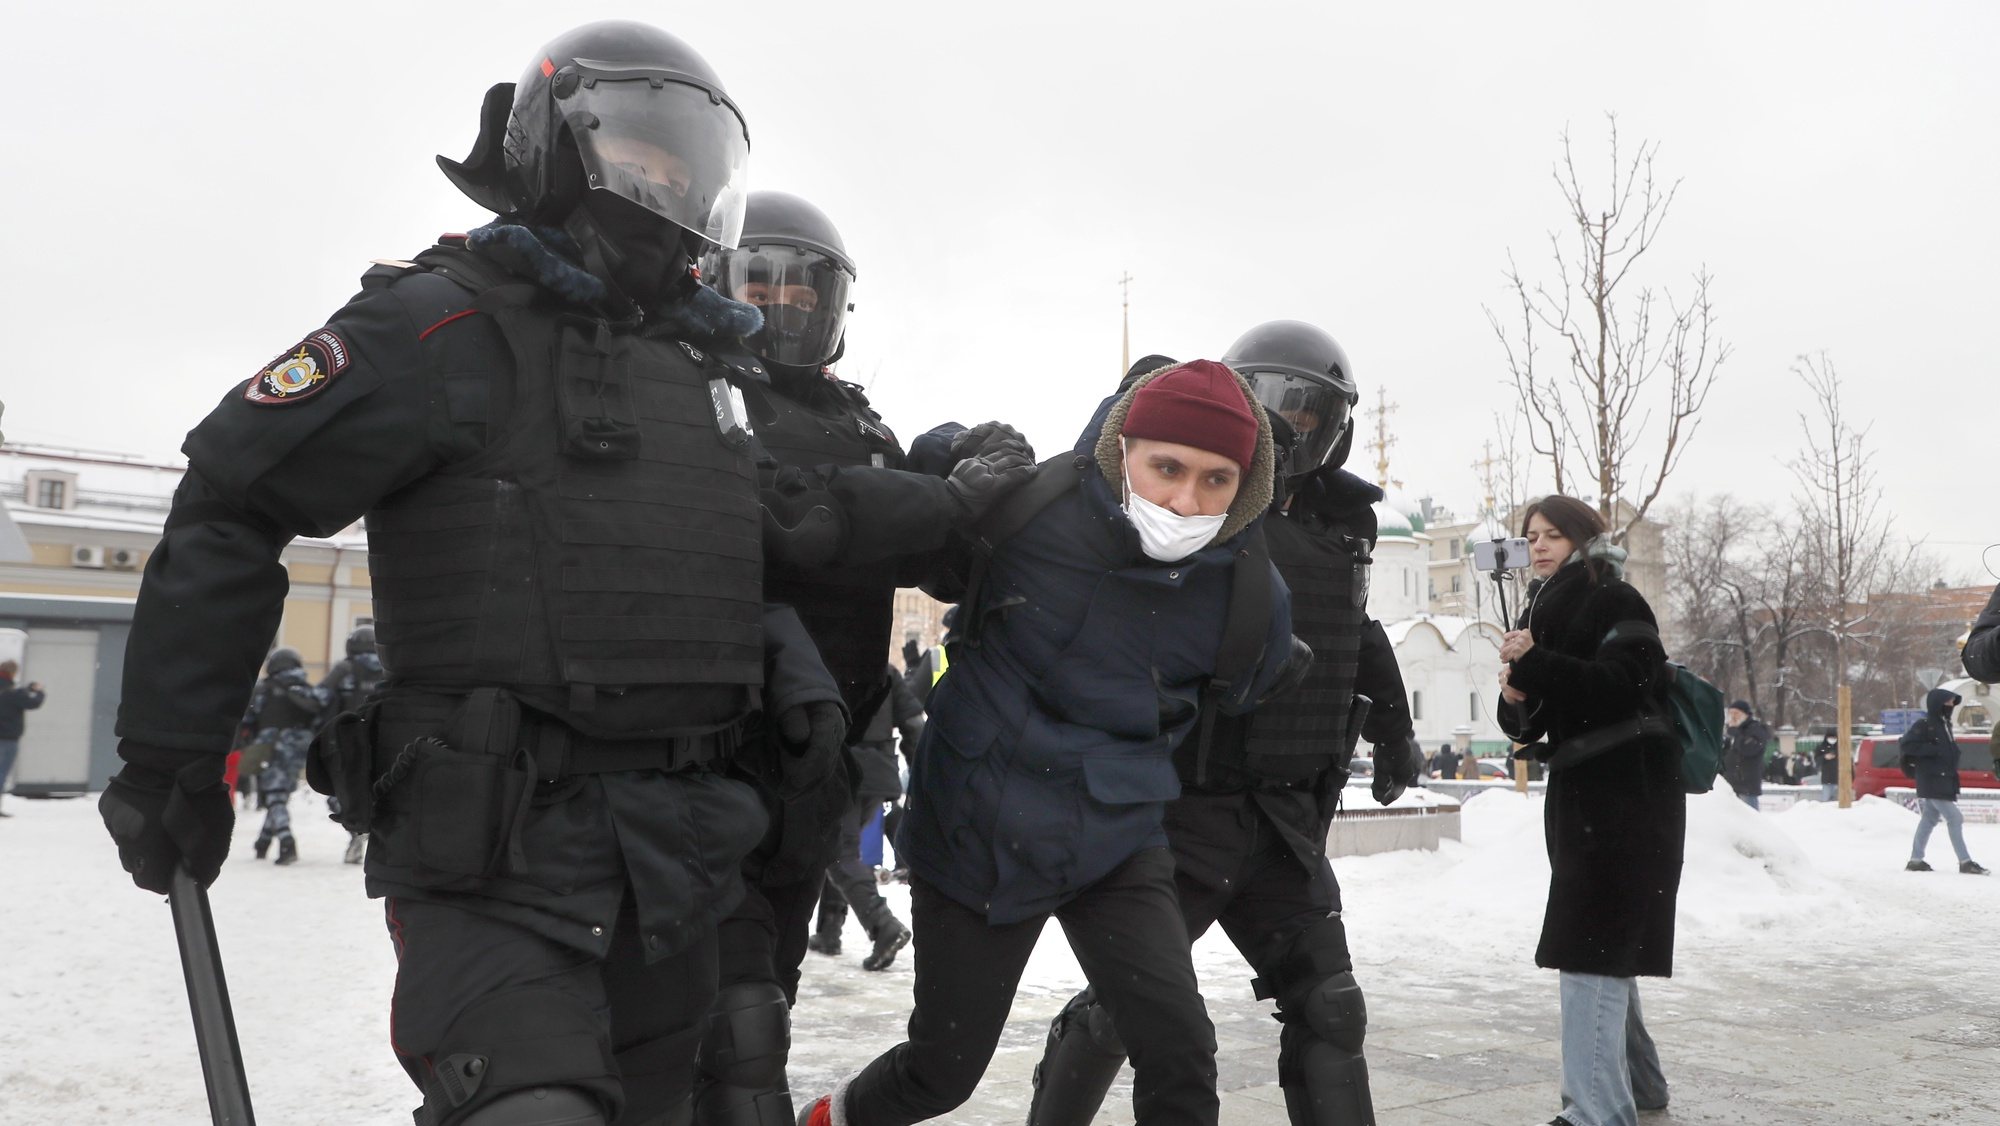 epa08976743 Russian police officers detains protester during an unauthorized protest in support of Russian opposition leader Alexei Navalny, Moscow, Russia, 31 January 2021. Navalny was detained after his arrival to Moscow from Germany on 17 January 2021. A Moscow judge on 18 January ruled that he will remain in custody for 30 days following his airport arrest. Navalny urged Russians to take to the streets to protest. In many Russian cities mass events are prohibited due to an increase in COVID-19 cases.  EPA/SERGEI ILNITSKY